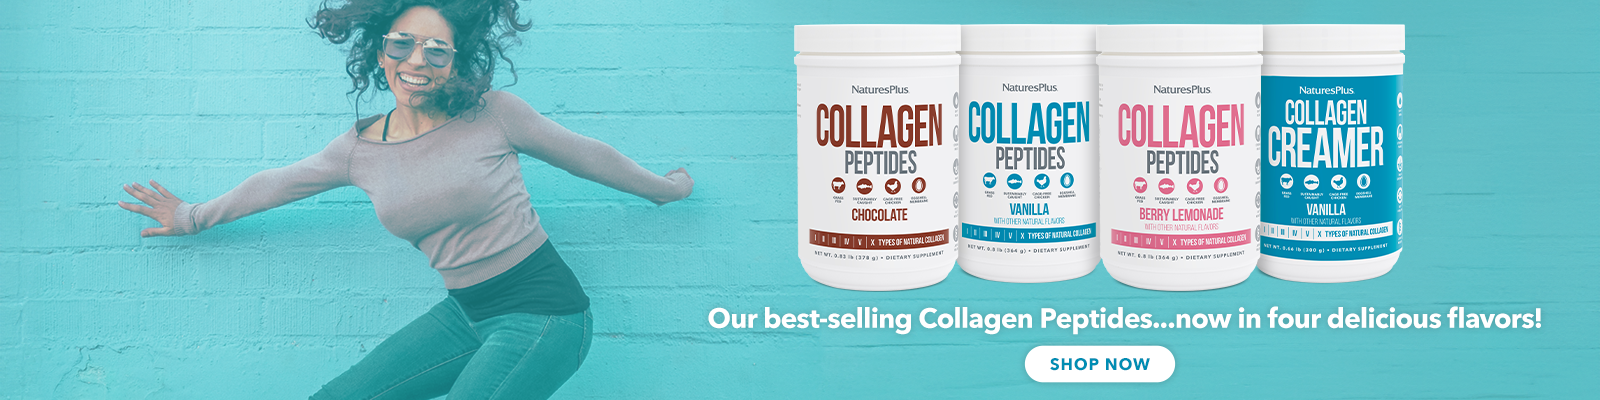 lady jumping next to a brick wall. naturesplus collagen products on the right. text under the products - Our best selling collagen peptides... now in four delicious flavors. 